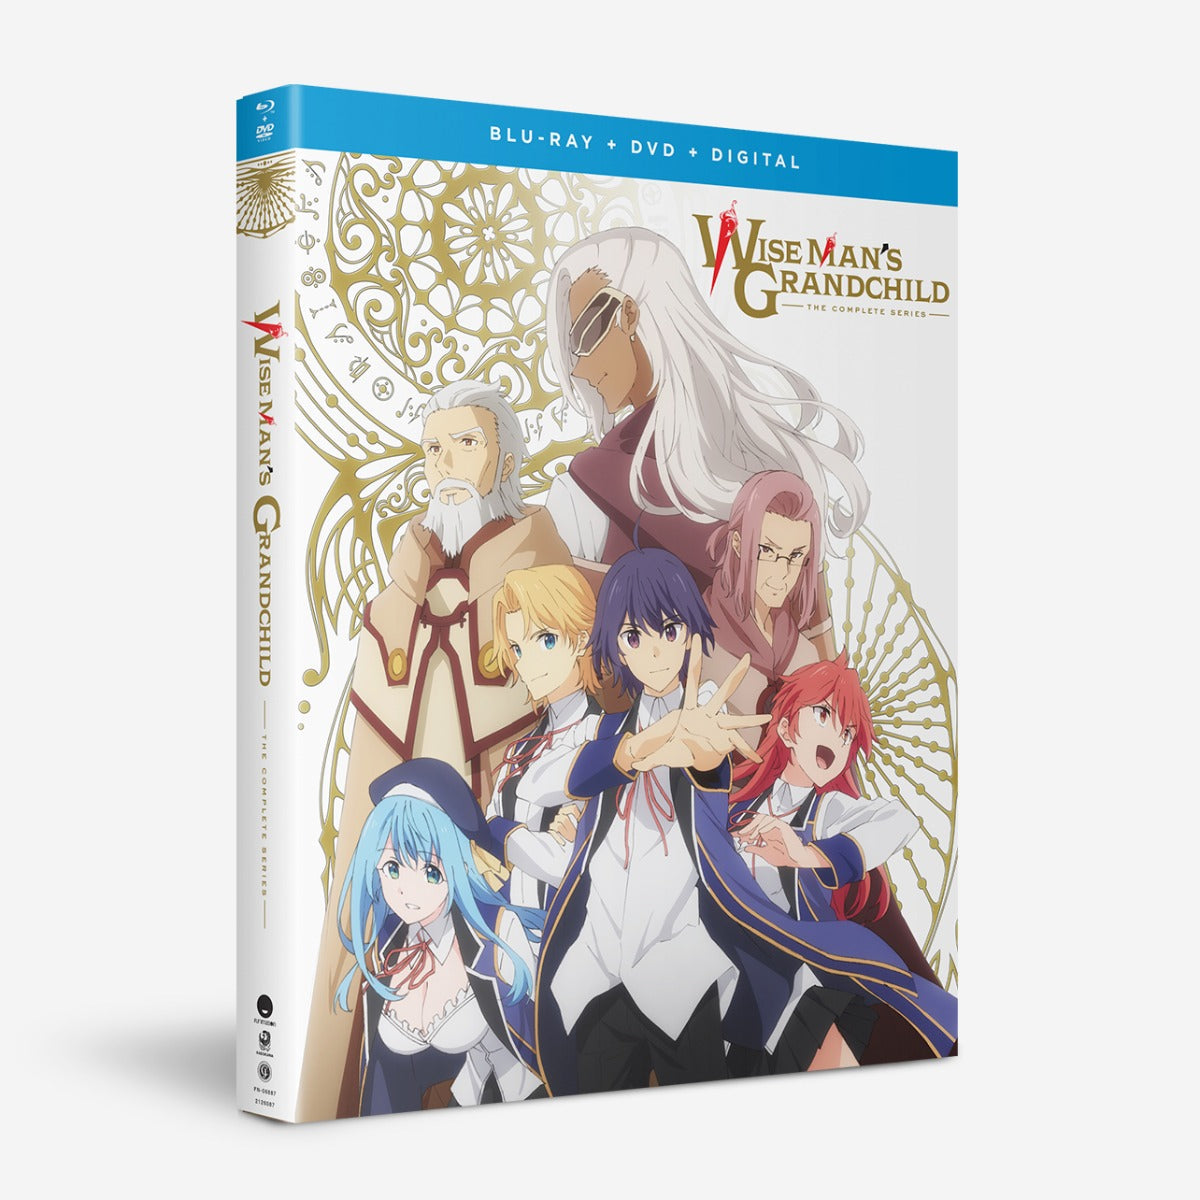 Wise Man's Grandchild - The Complete Series - Blu-ray + DVD image count 0